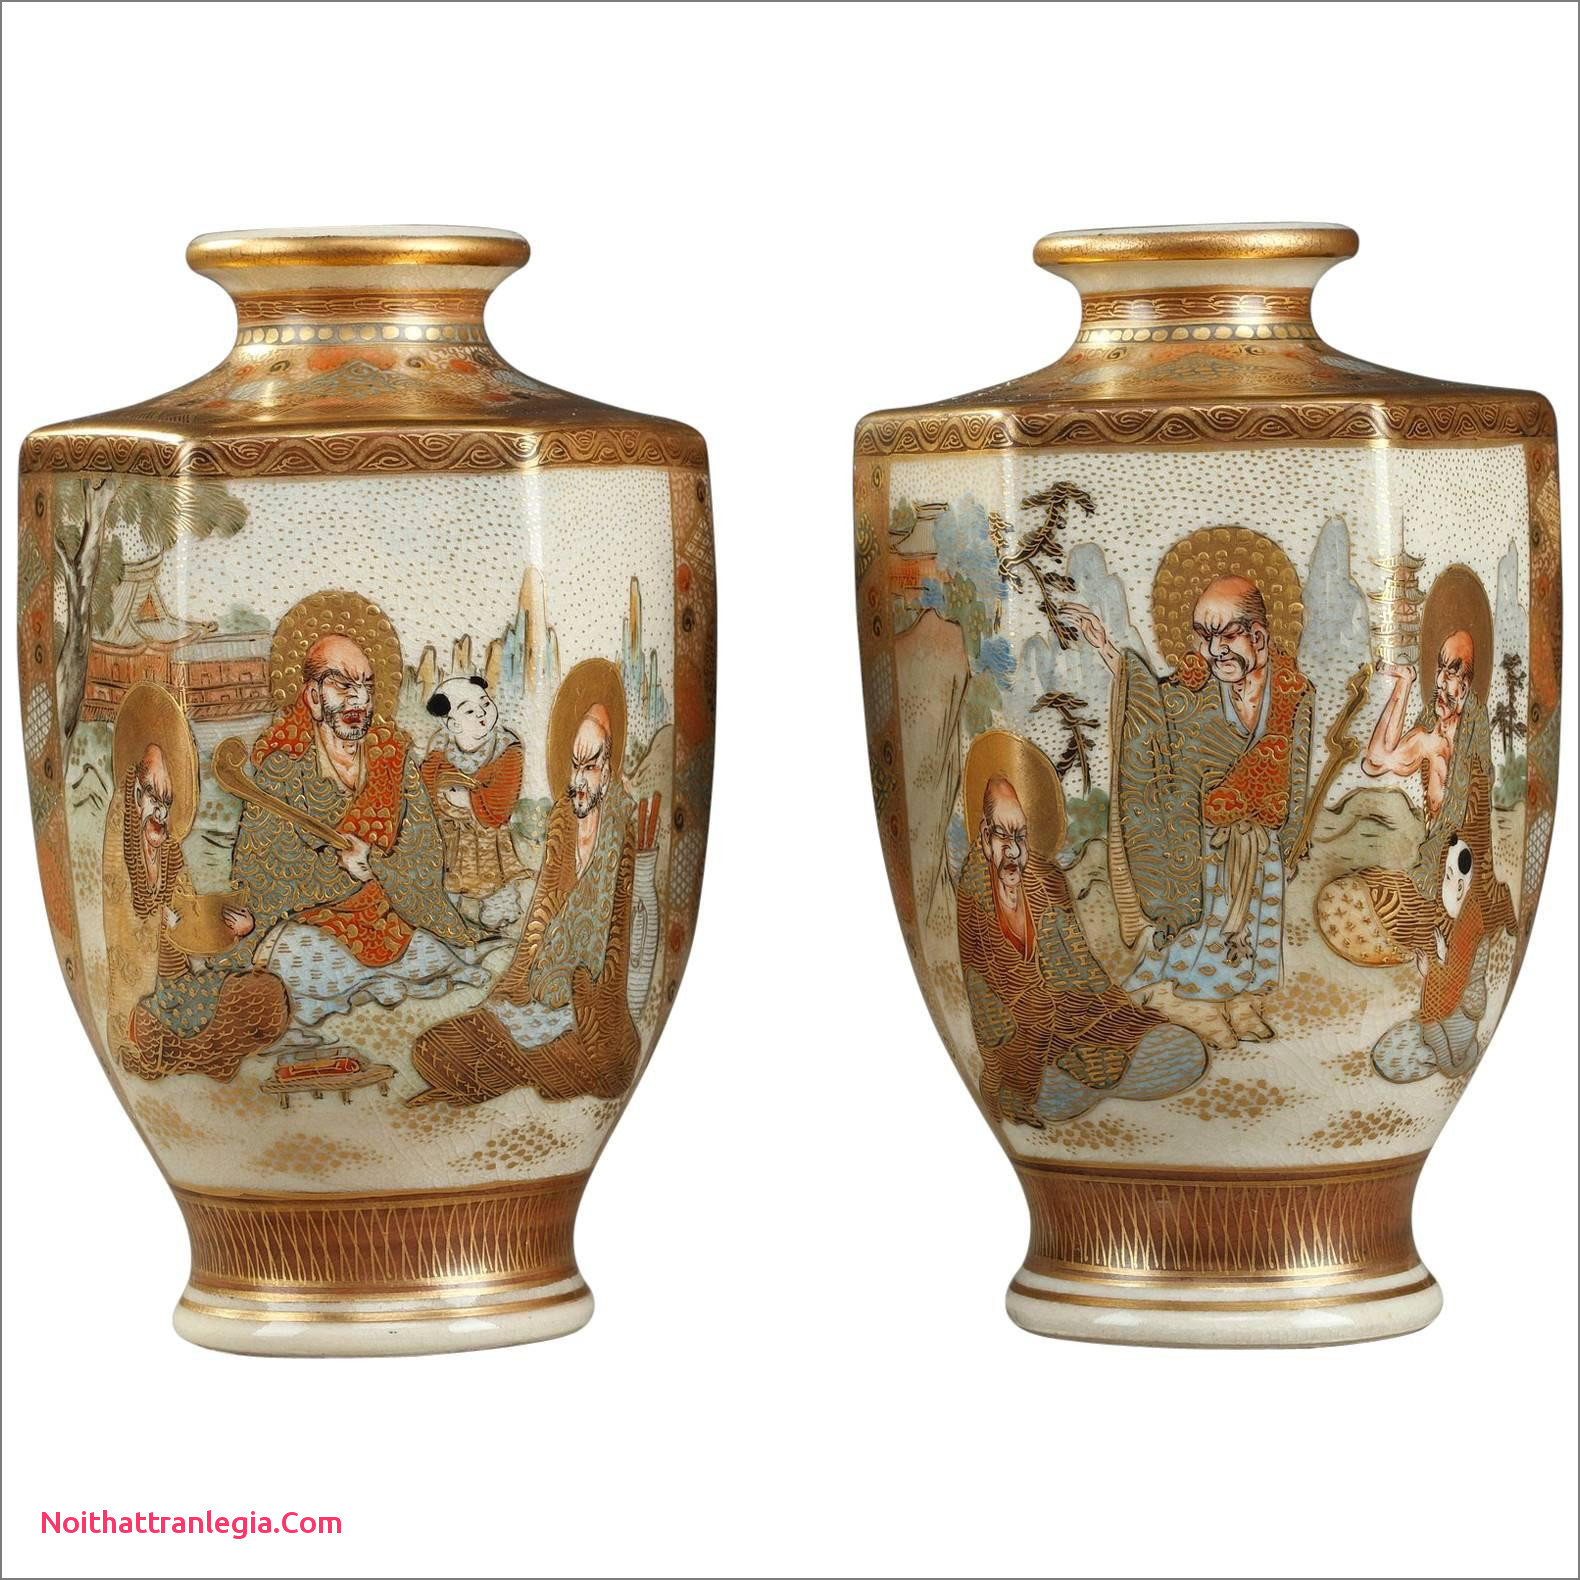 21 Cute Antique Vases for Sale 2024 free download antique vases for sale of 20 chinese antique vase noithattranlegia vases design within chinese ginger jar table lamps elegant pair 20th century general porcelain trenton nj usa industrial